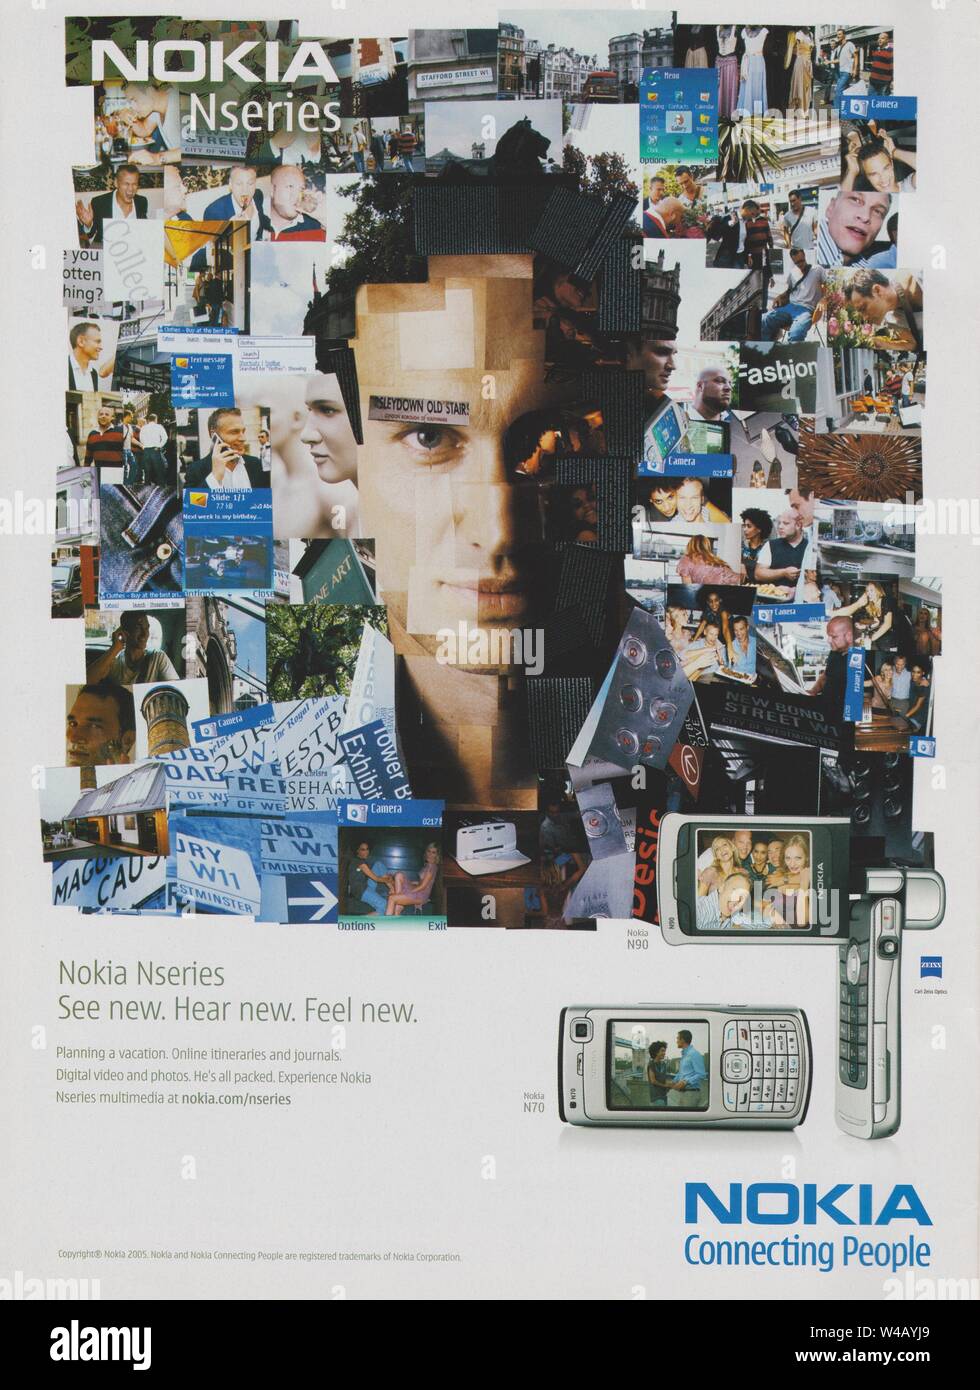 poster advertising Nokia Nseries N70, N90 phone in magazine from 2006, NOKIA Connecting People slogan, advertisement, creative Nokia 2000s advert Stock Photo